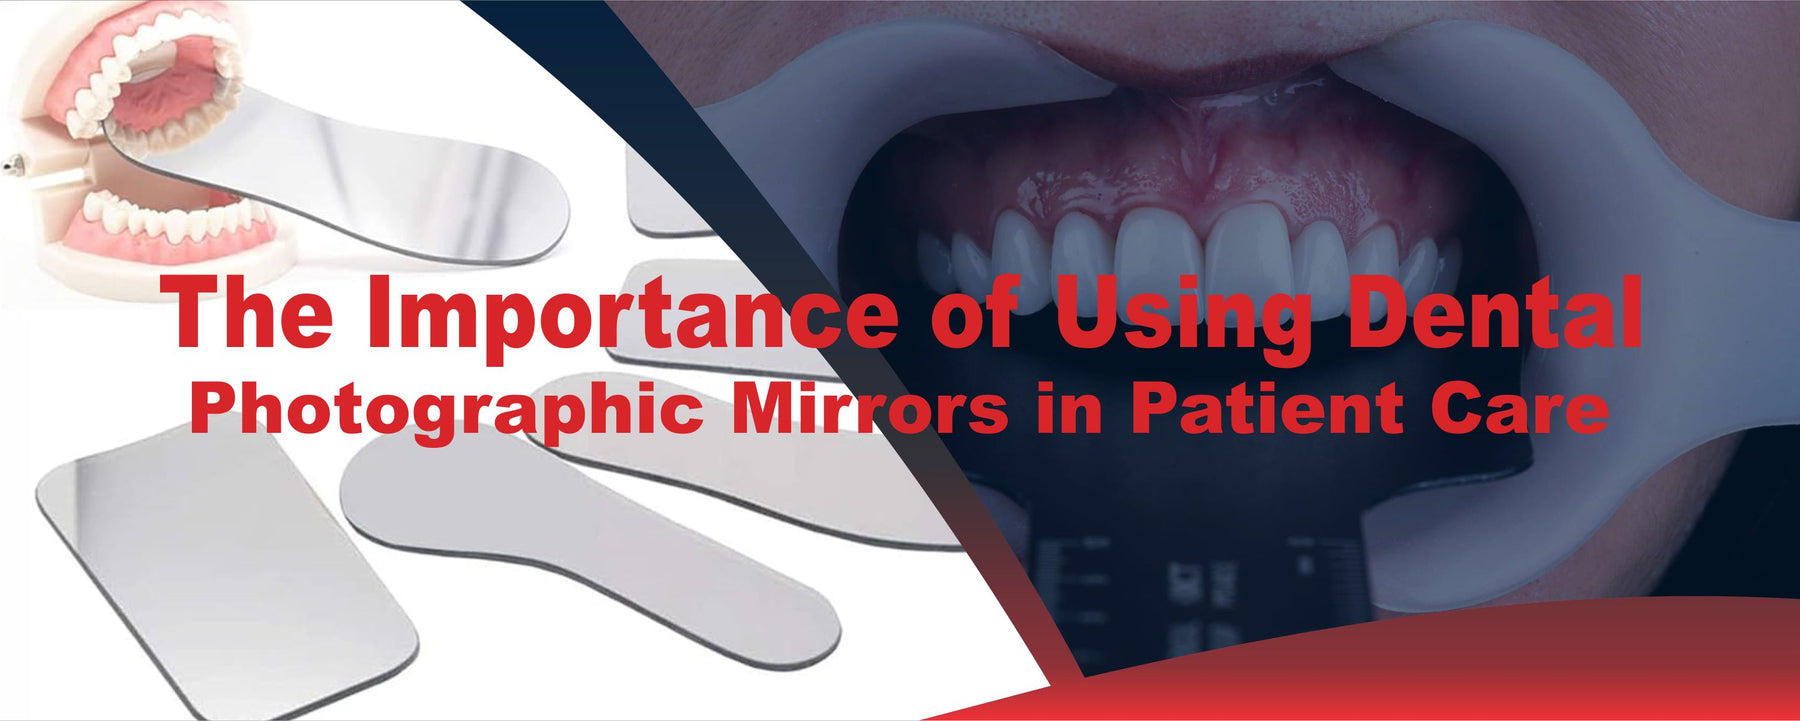 The Importance of Using Dental Photographic Mirrors in Patient Care